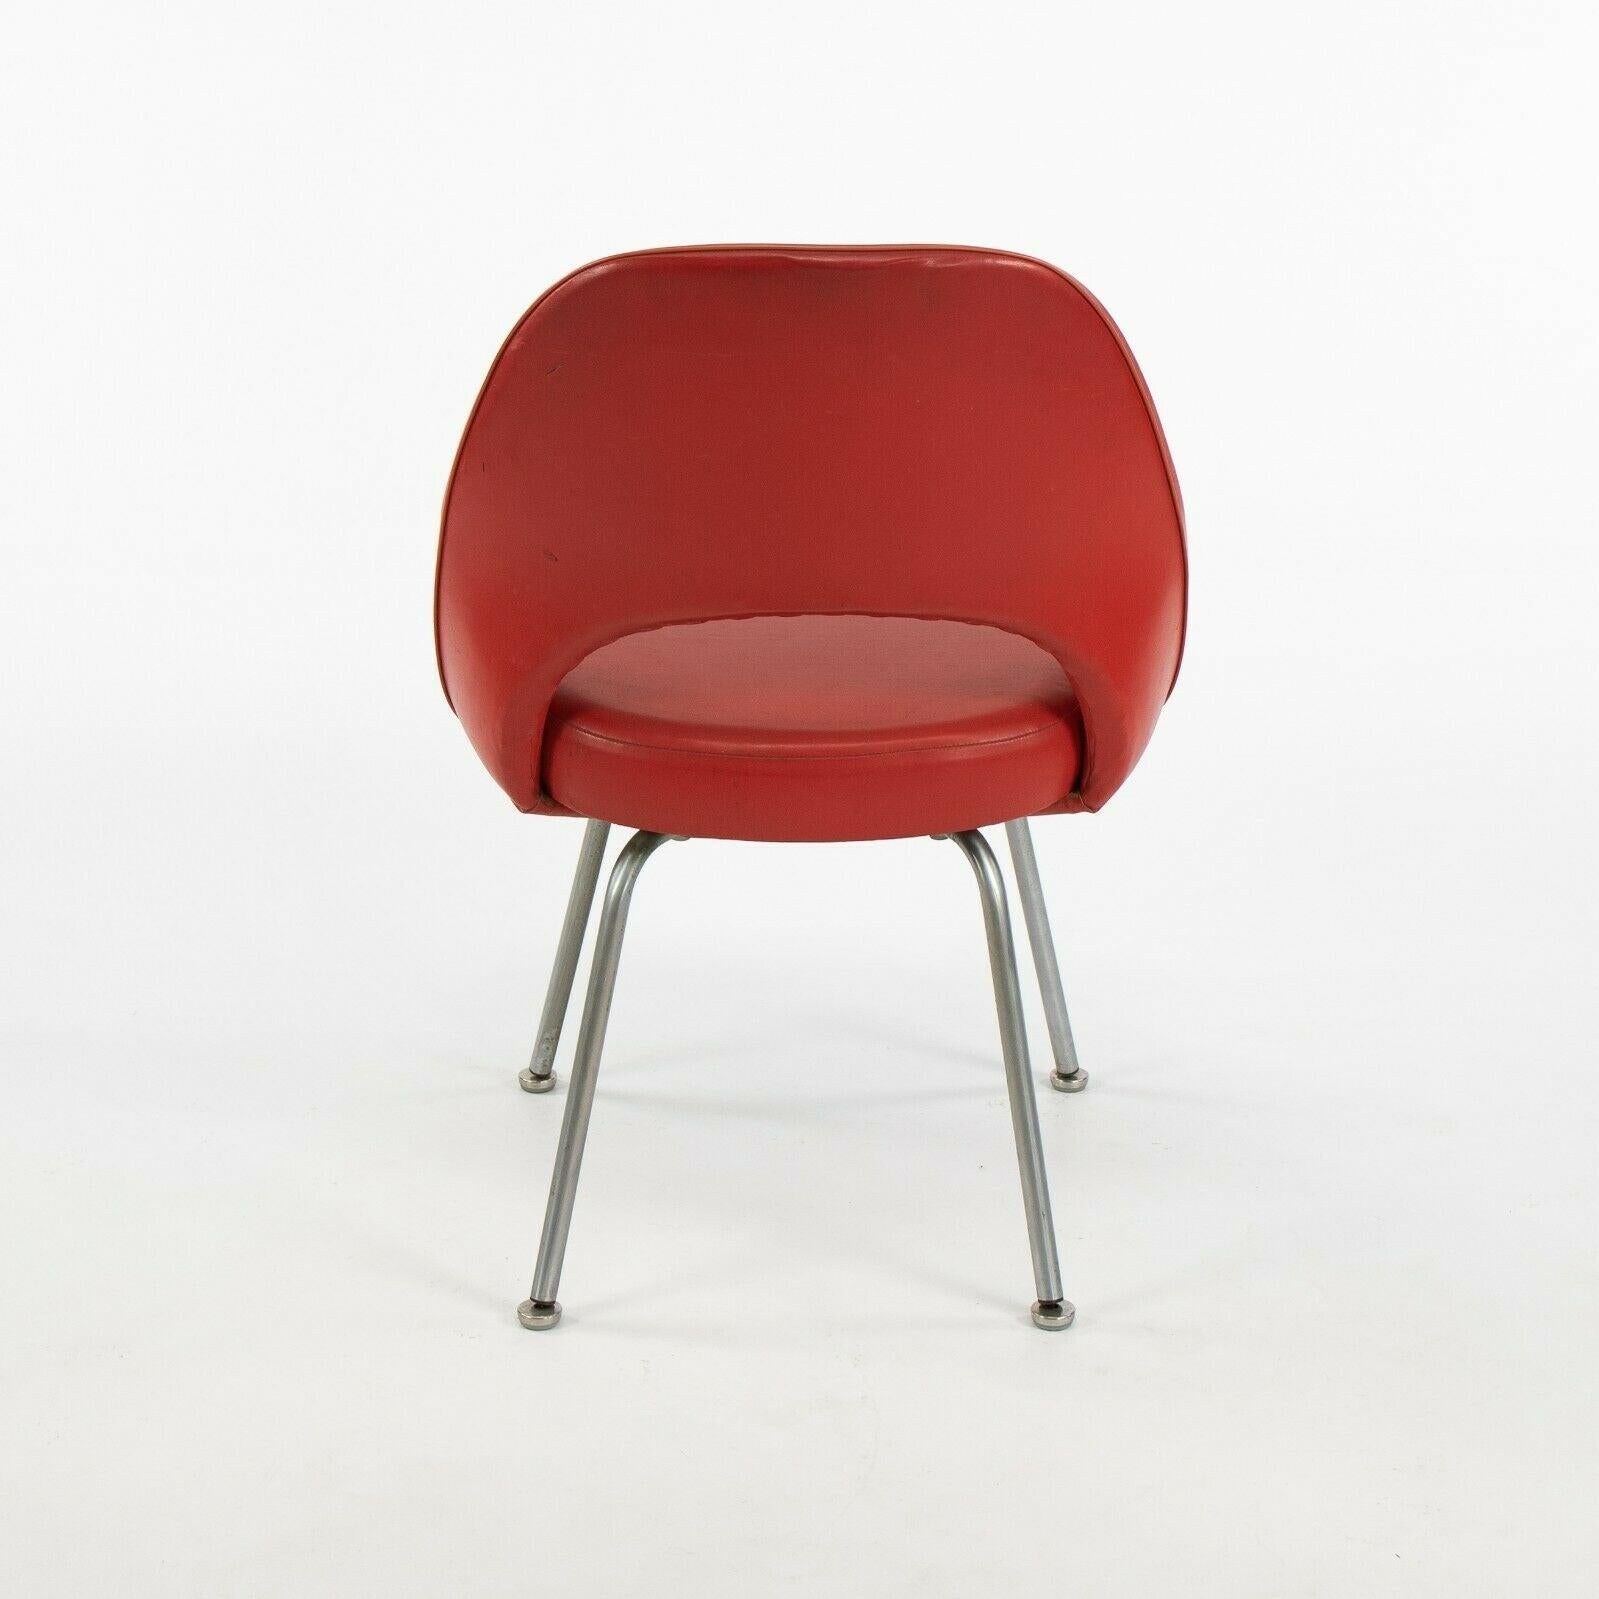 Metal 1963 Pair of Eero Saarinen for Knoll Red Vinyl Armless Executive Dining Chairs For Sale